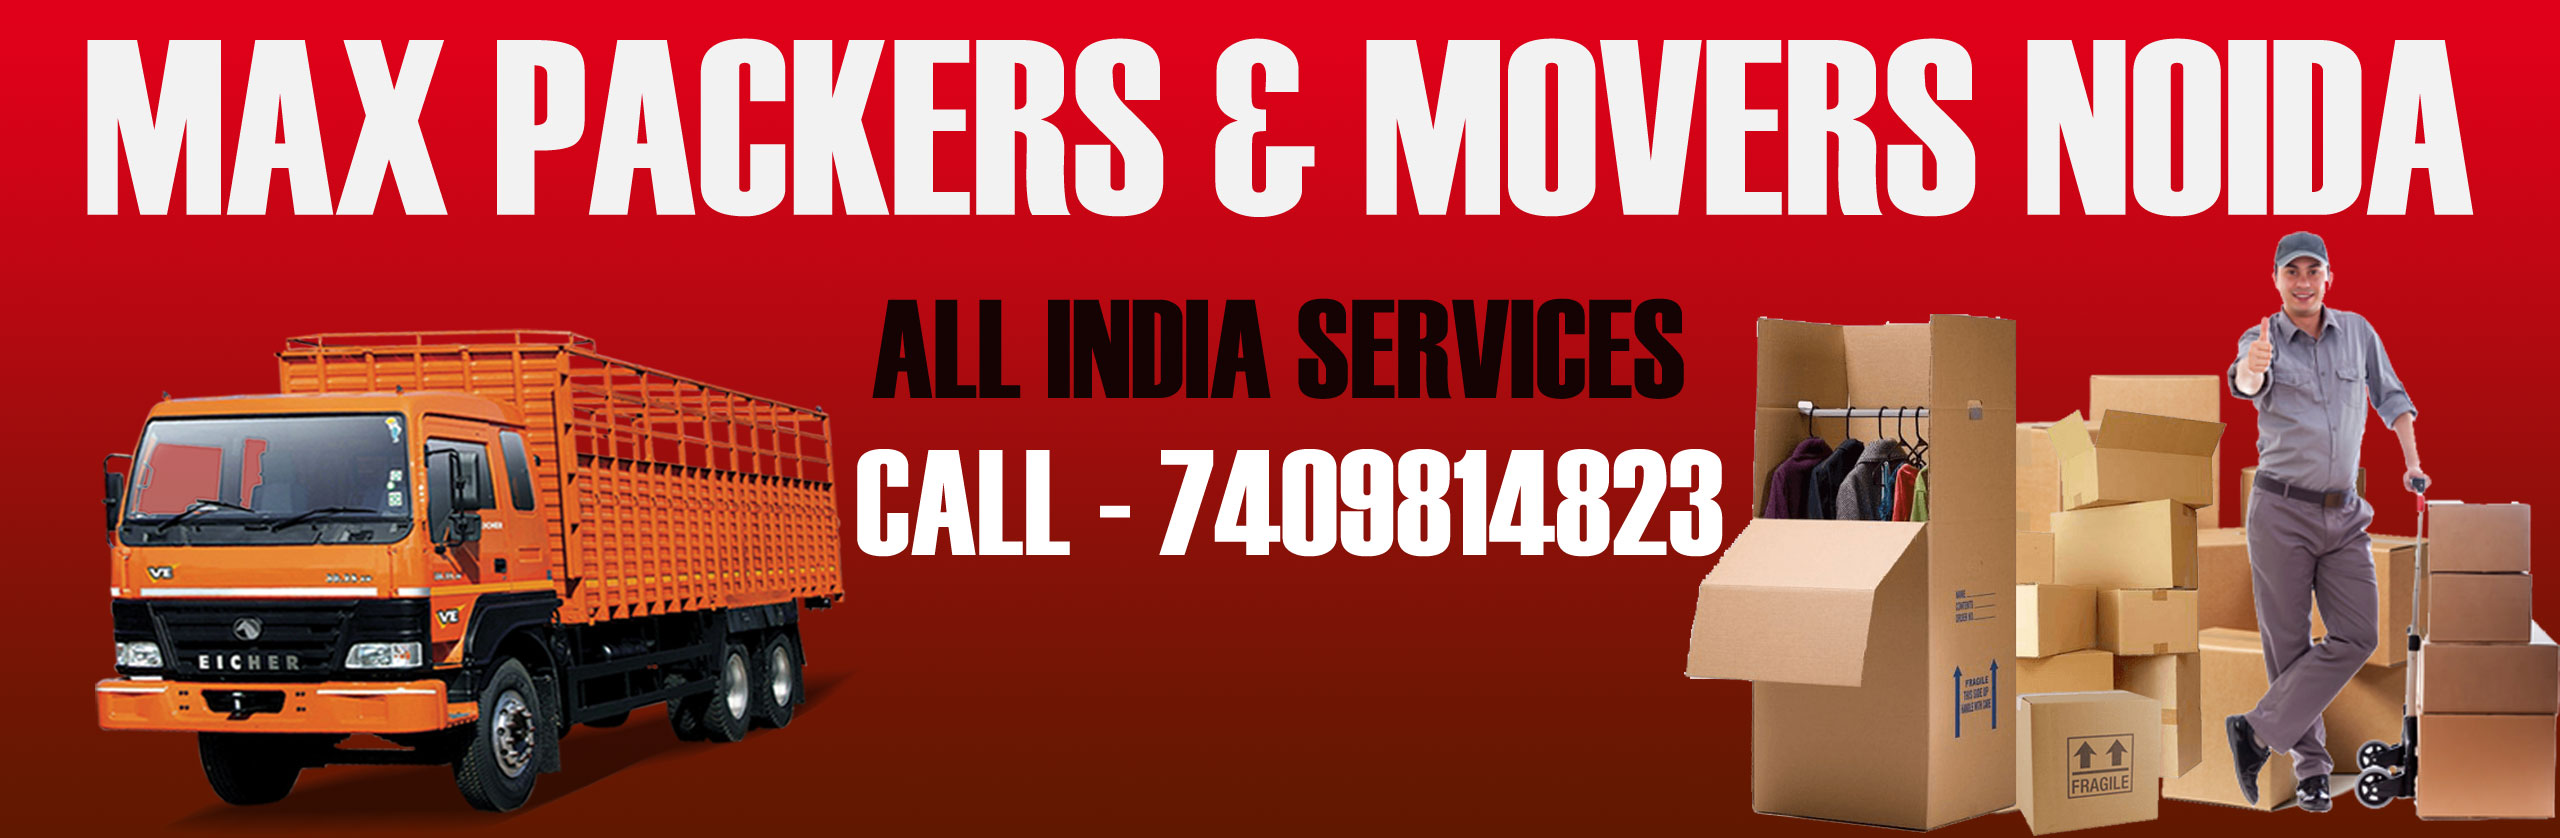 Max packers and movers noida Banner